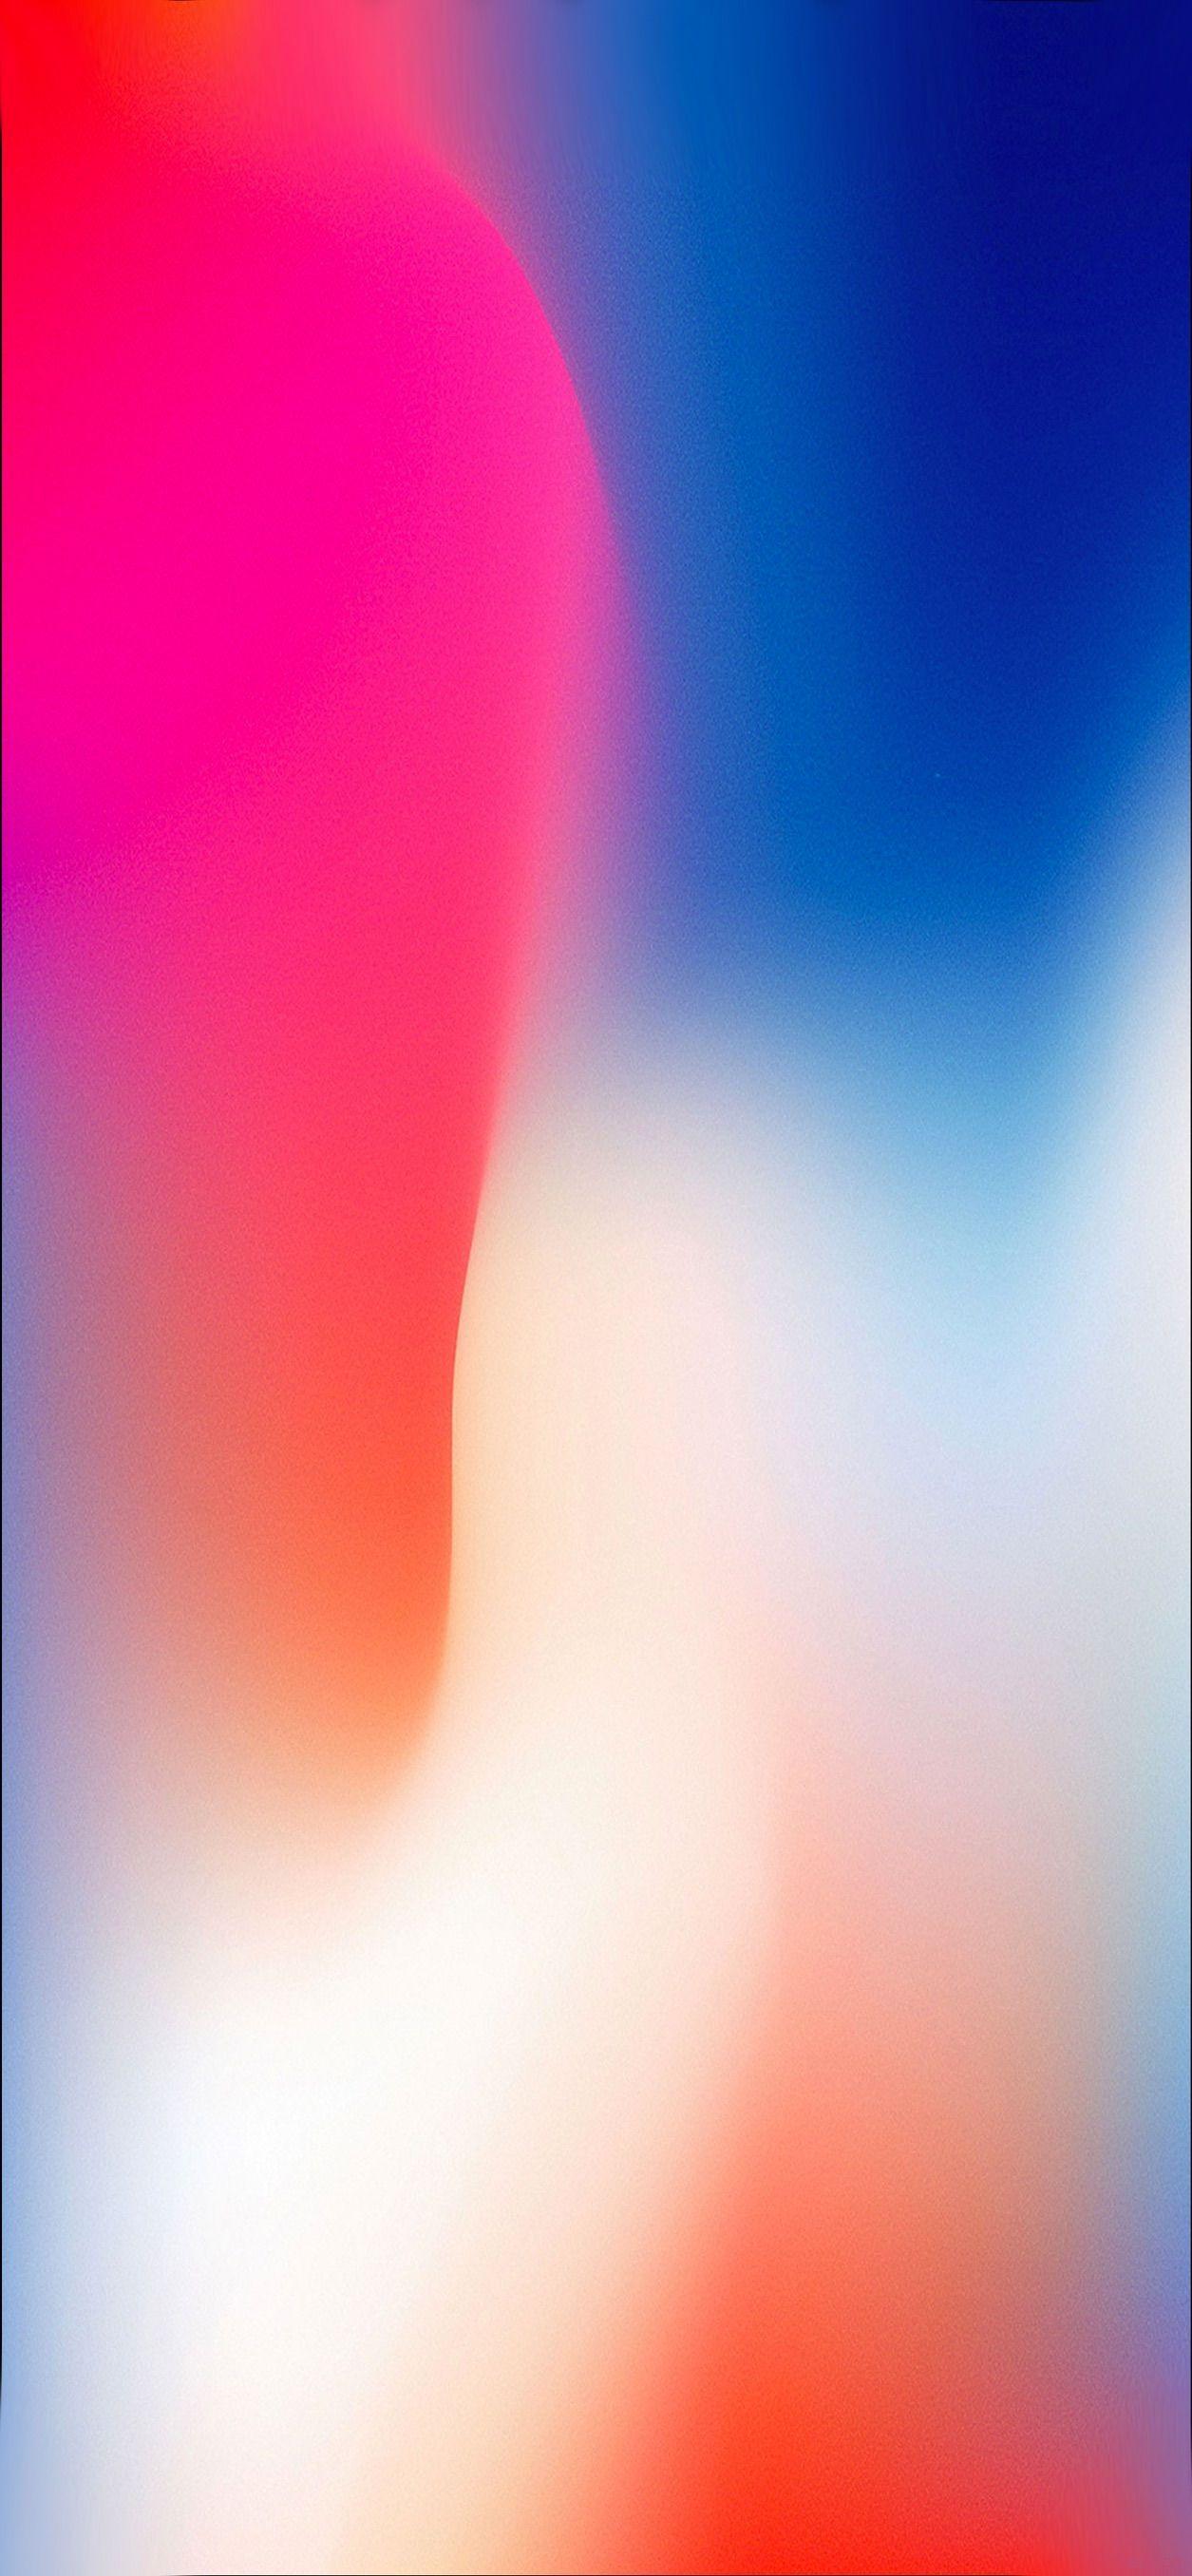 Apple Iphone X Wallpapers Top Free Apple Iphone X Backgrounds Wallpaperaccess